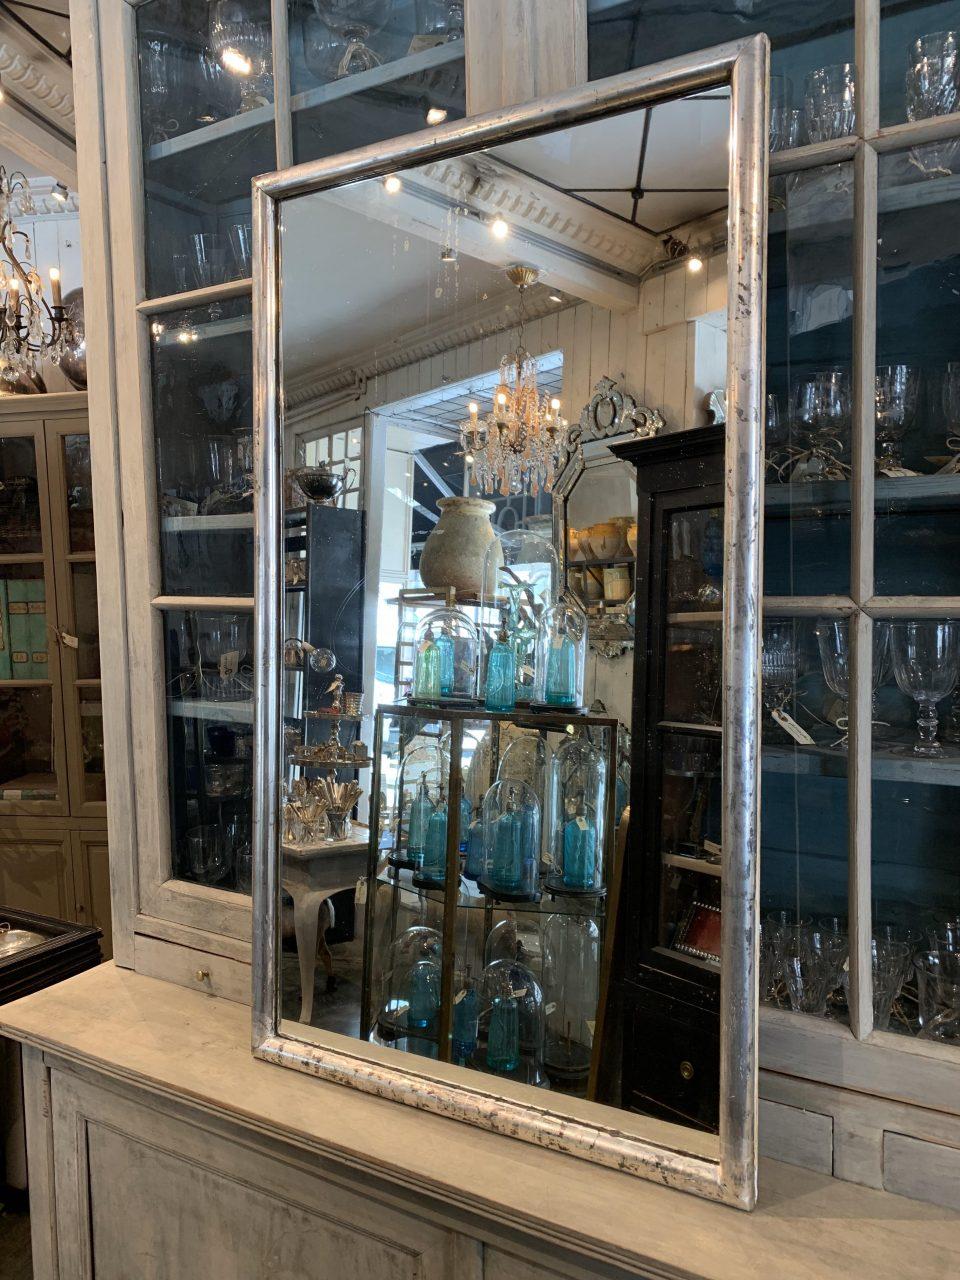 Large and handsome antique French mirror from around 1880-1890s, surrounded by a charming sleek rounded and patinated silver frame. The mirror still retains the original fine silver leaf coating on the frame and the old mercury mirror